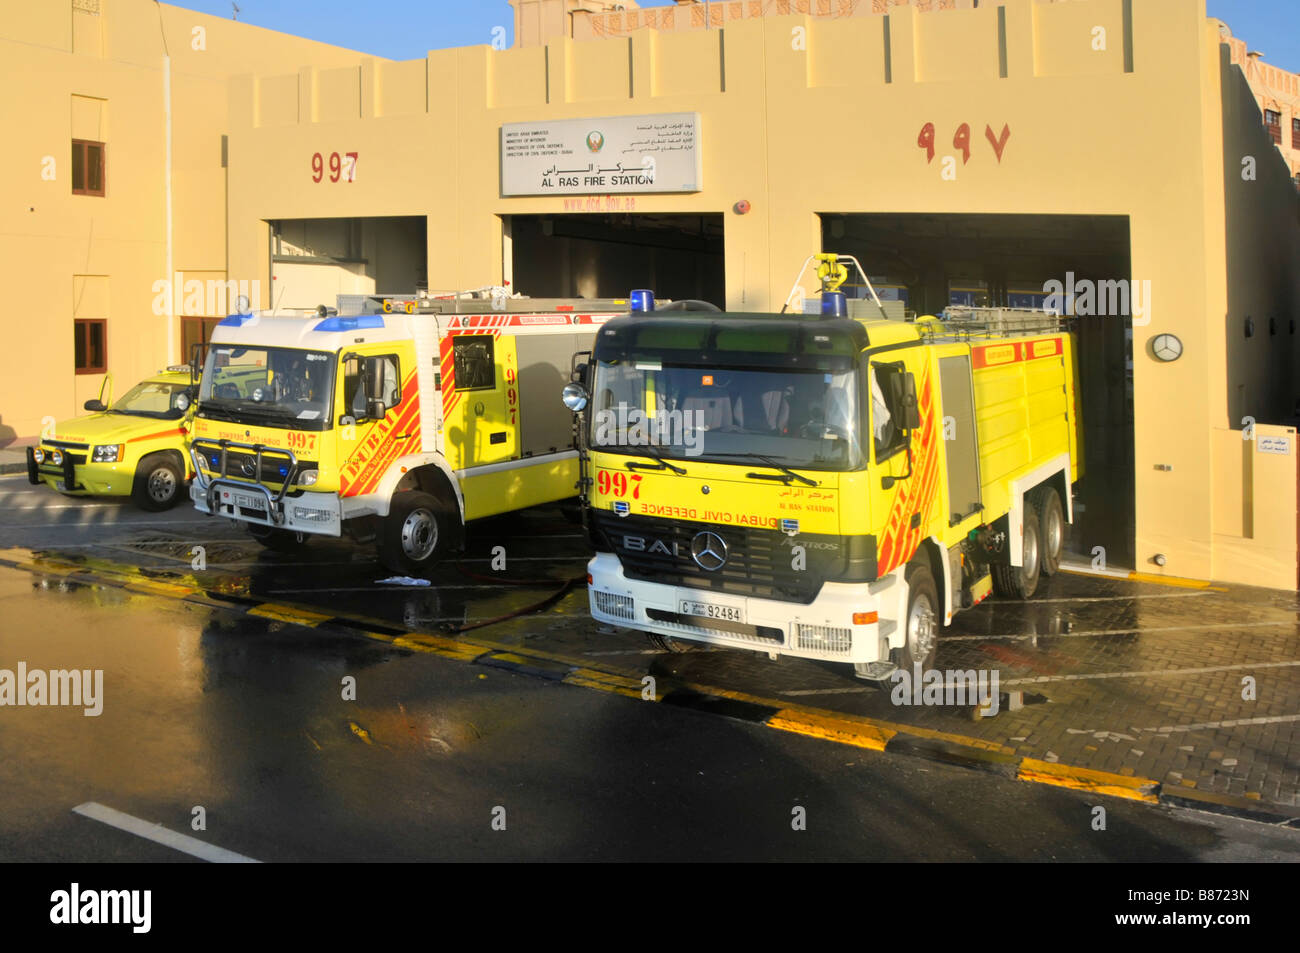 Dubai Al Ras firefighters fire engine station & Civil Defence fire truck vehicles outside fire station building United Arab Emirates UAE Middle East Stock Photo